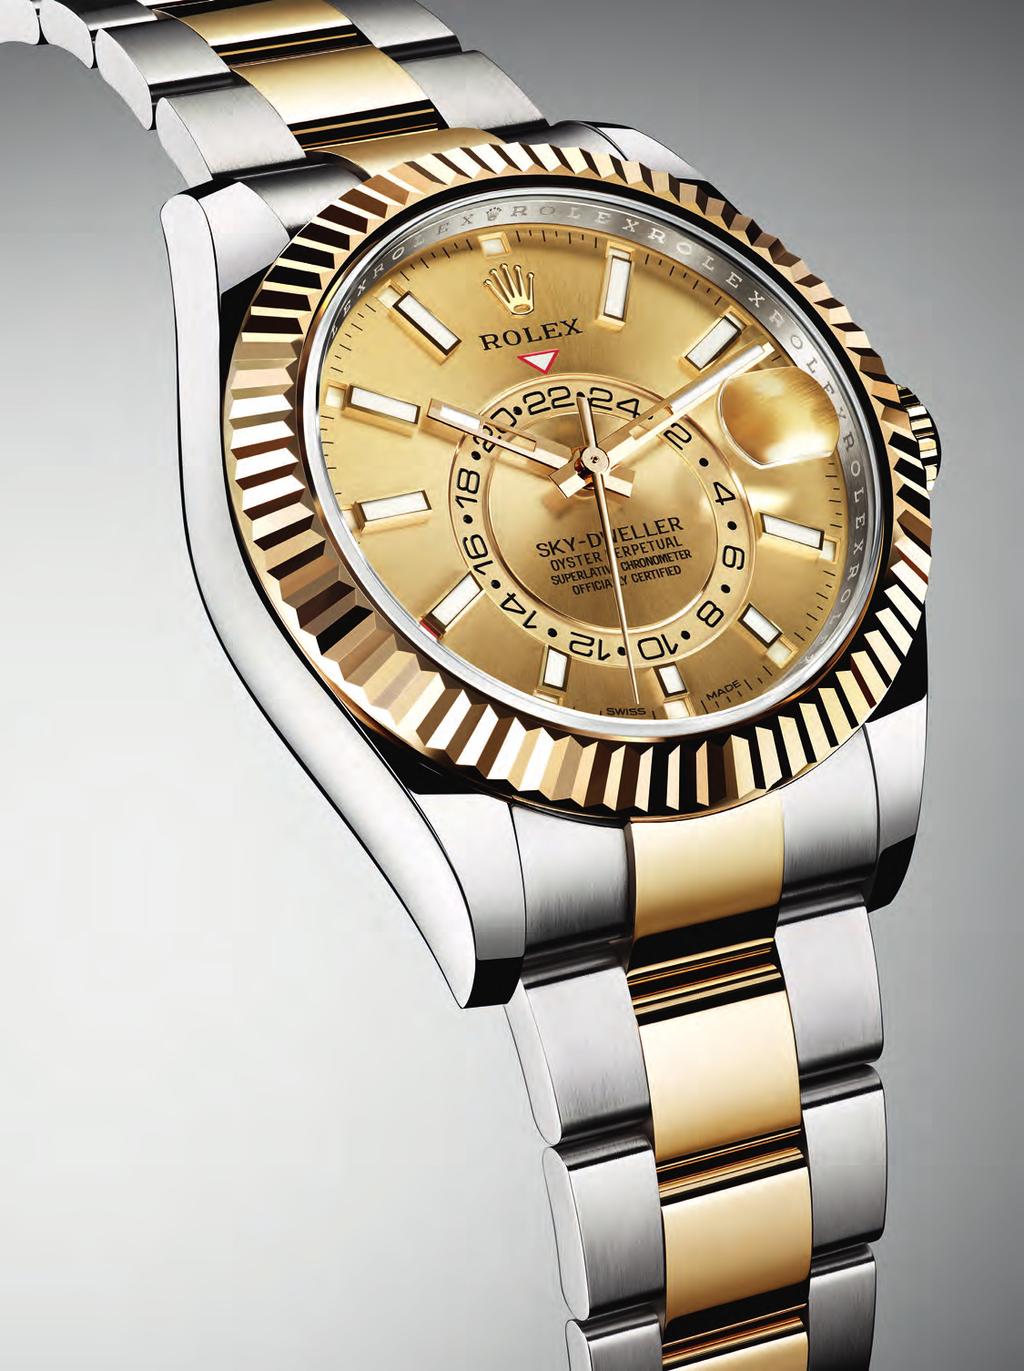 New features of the new Rolex Sky-Dweller in yellow Rolesor Versions in